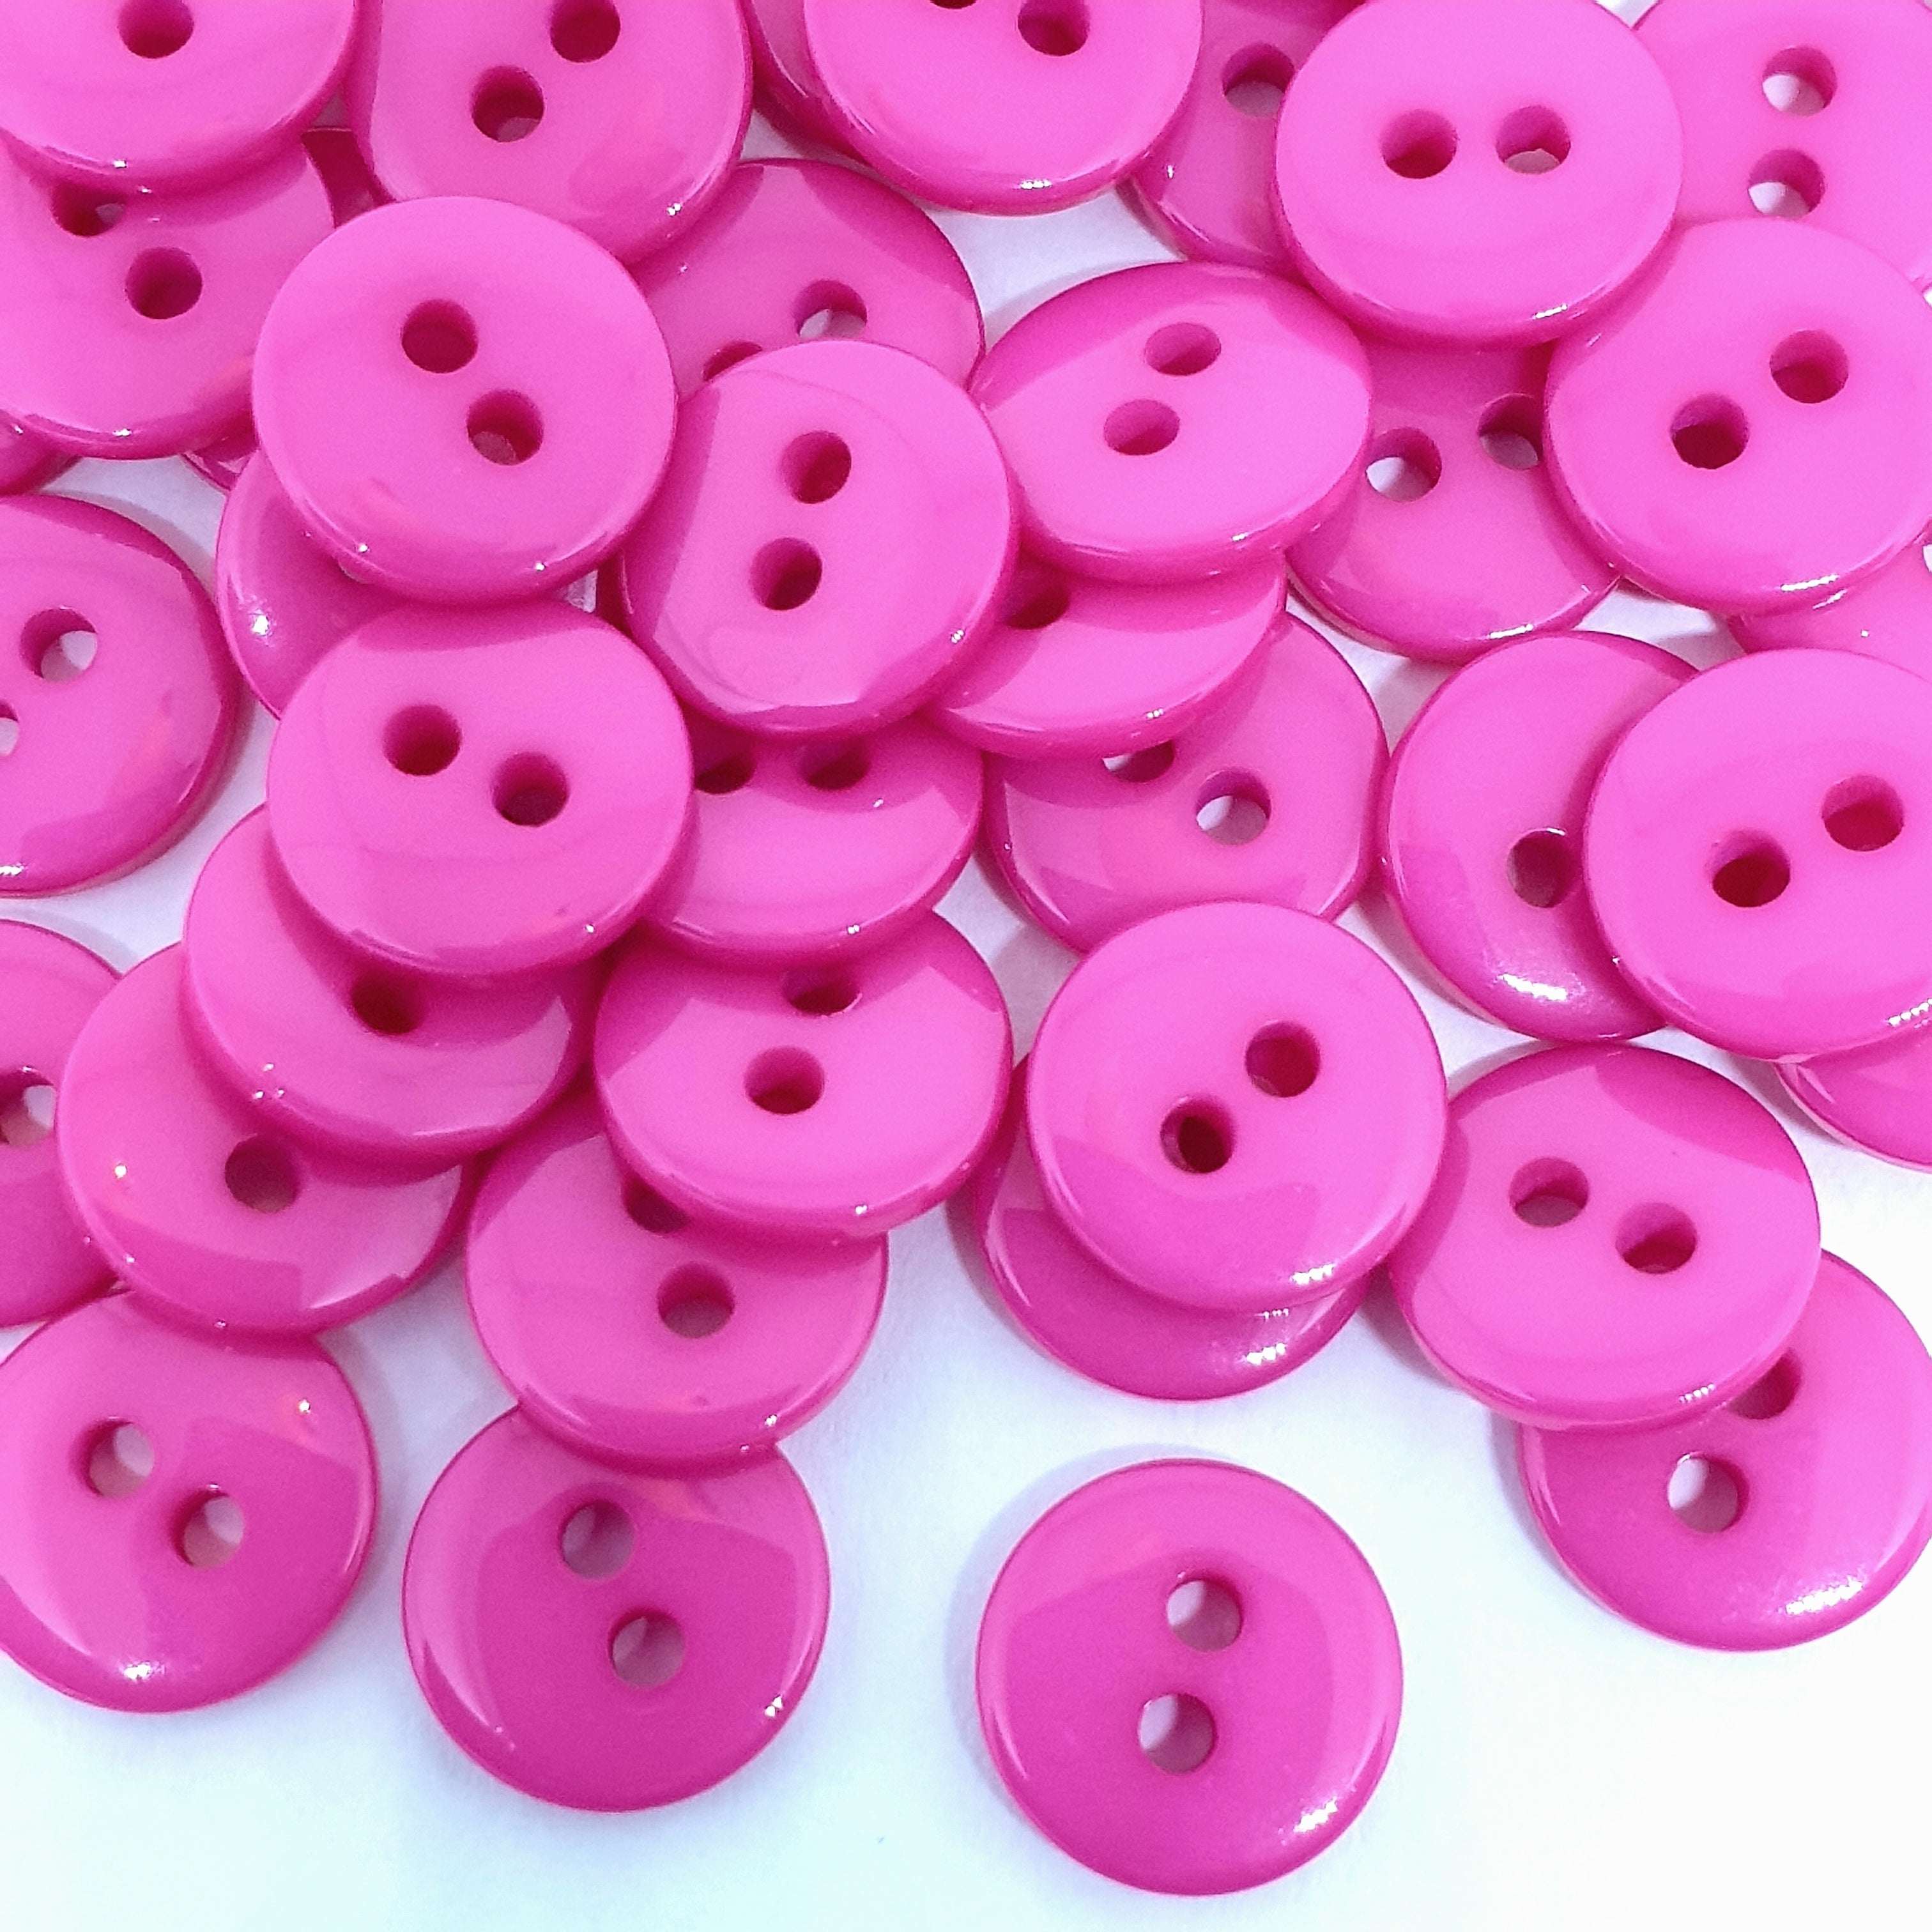 MajorCrafts 120pcs 9mm Hot Pink 2 Holes Small Round Resin Sewing Buttons B05